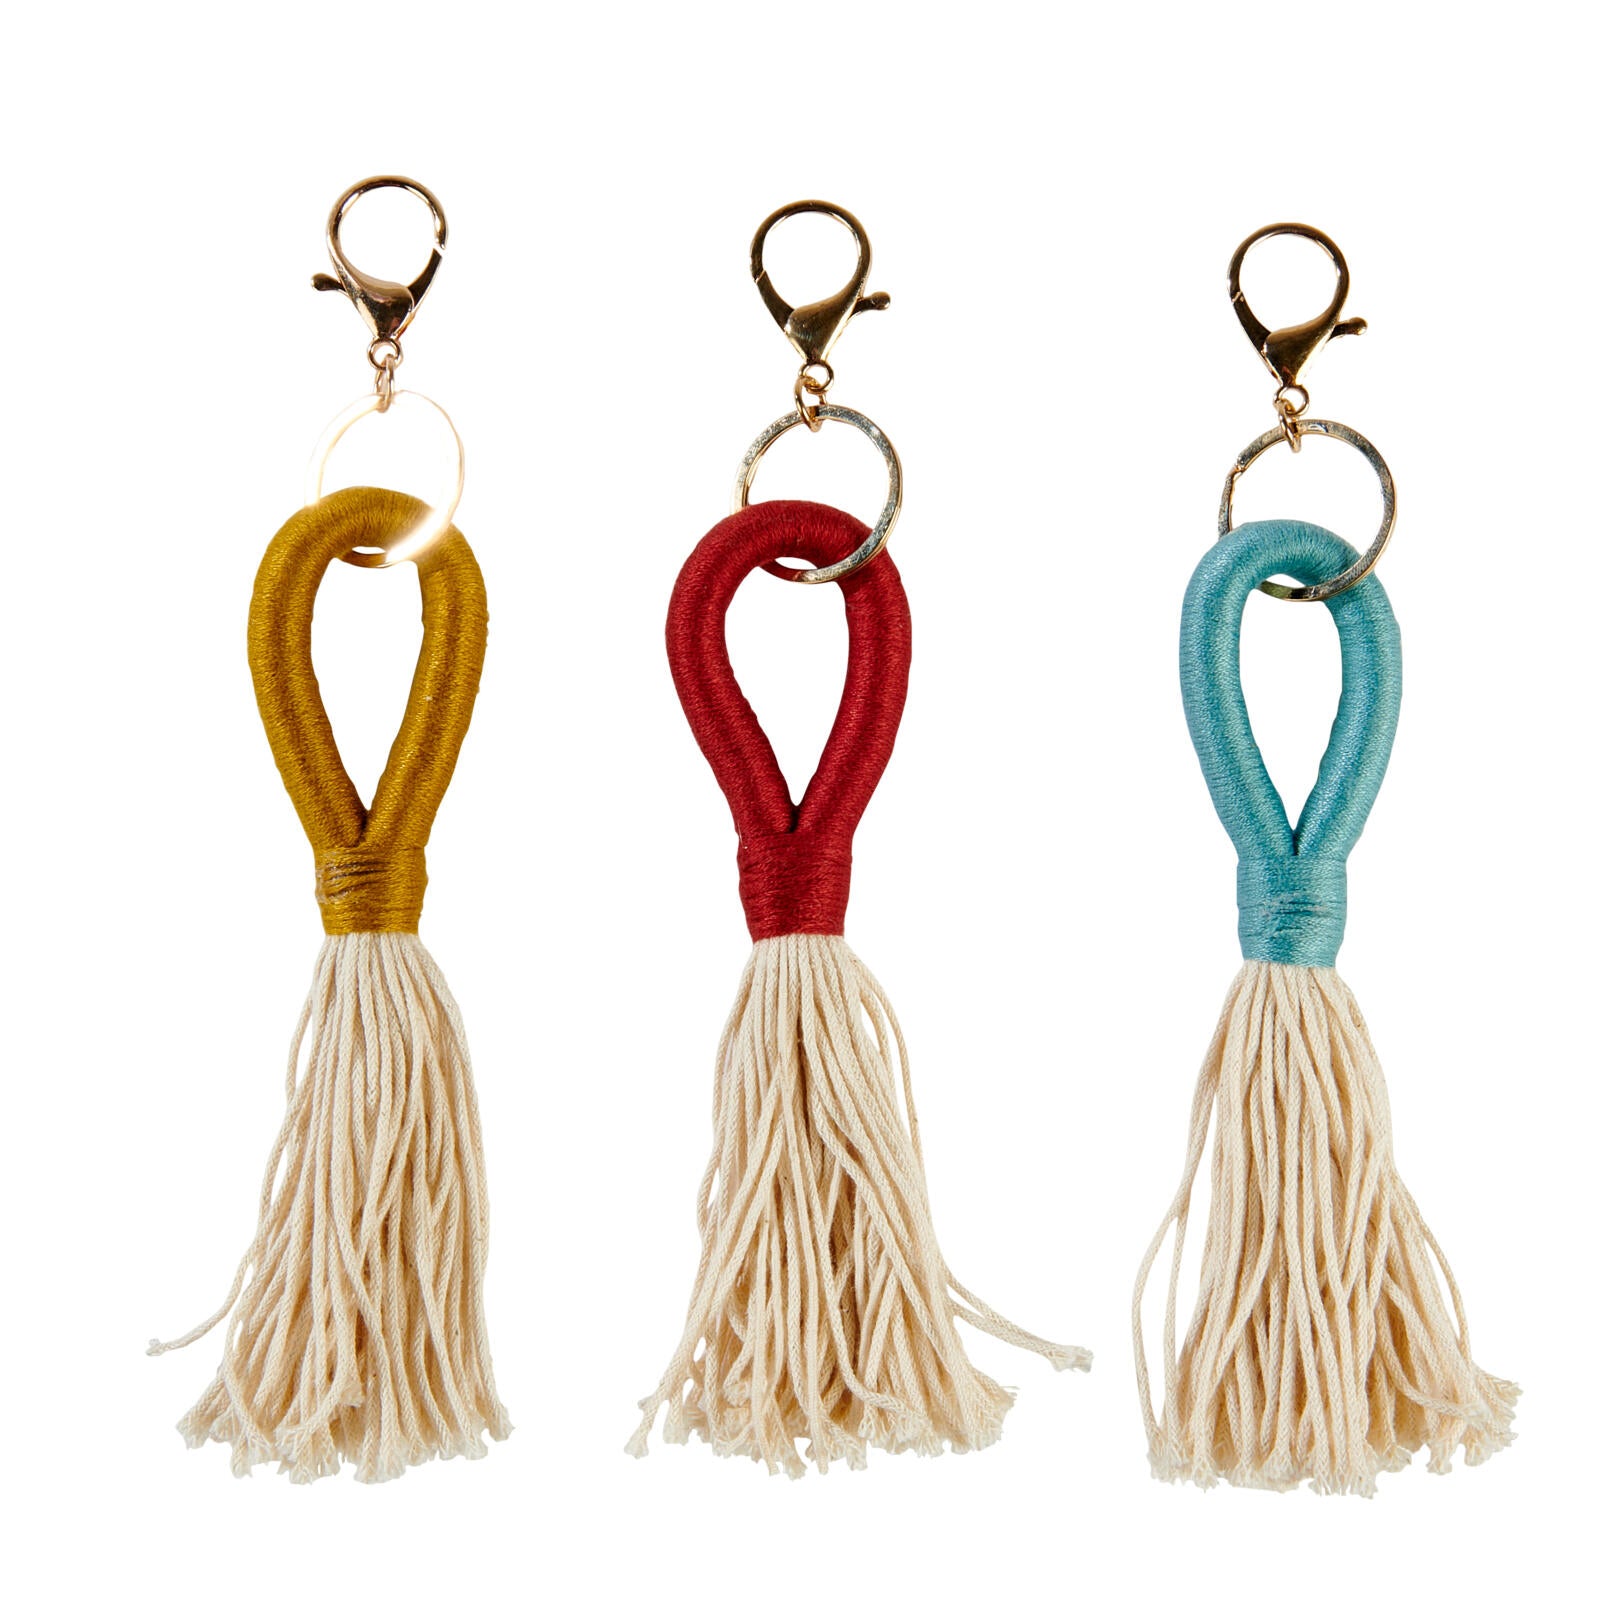 KNOT KEY CHAIN 3 COL